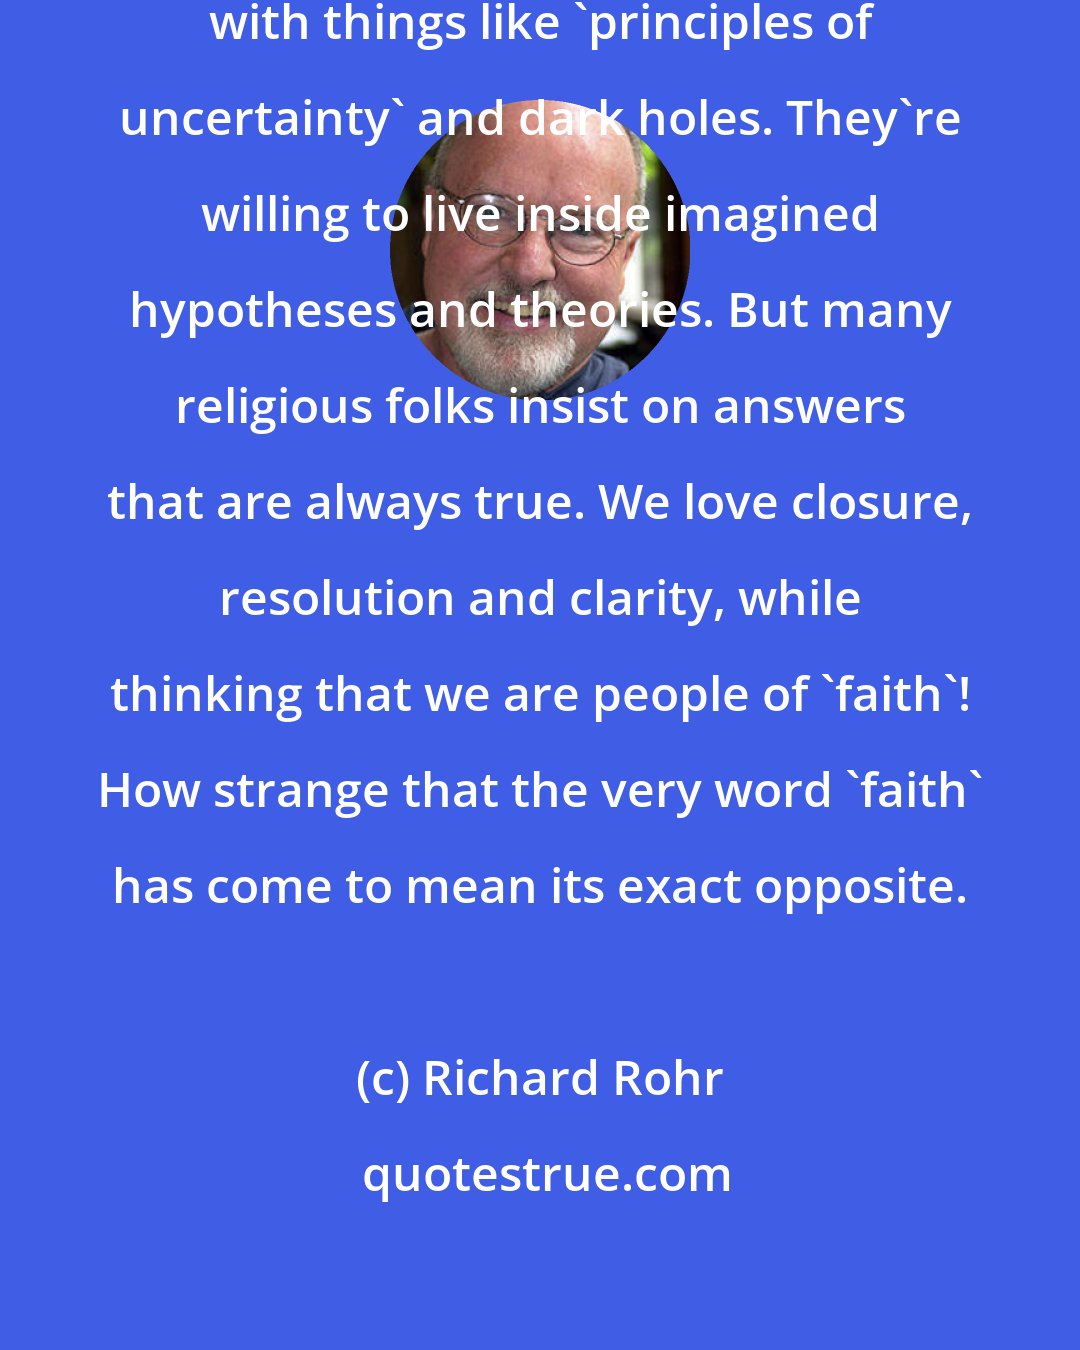 Richard Rohr: My scientist friends have come up with things like 'principles of uncertainty' and dark holes. They're willing to live inside imagined hypotheses and theories. But many religious folks insist on answers that are always true. We love closure, resolution and clarity, while thinking that we are people of 'faith'! How strange that the very word 'faith' has come to mean its exact opposite.